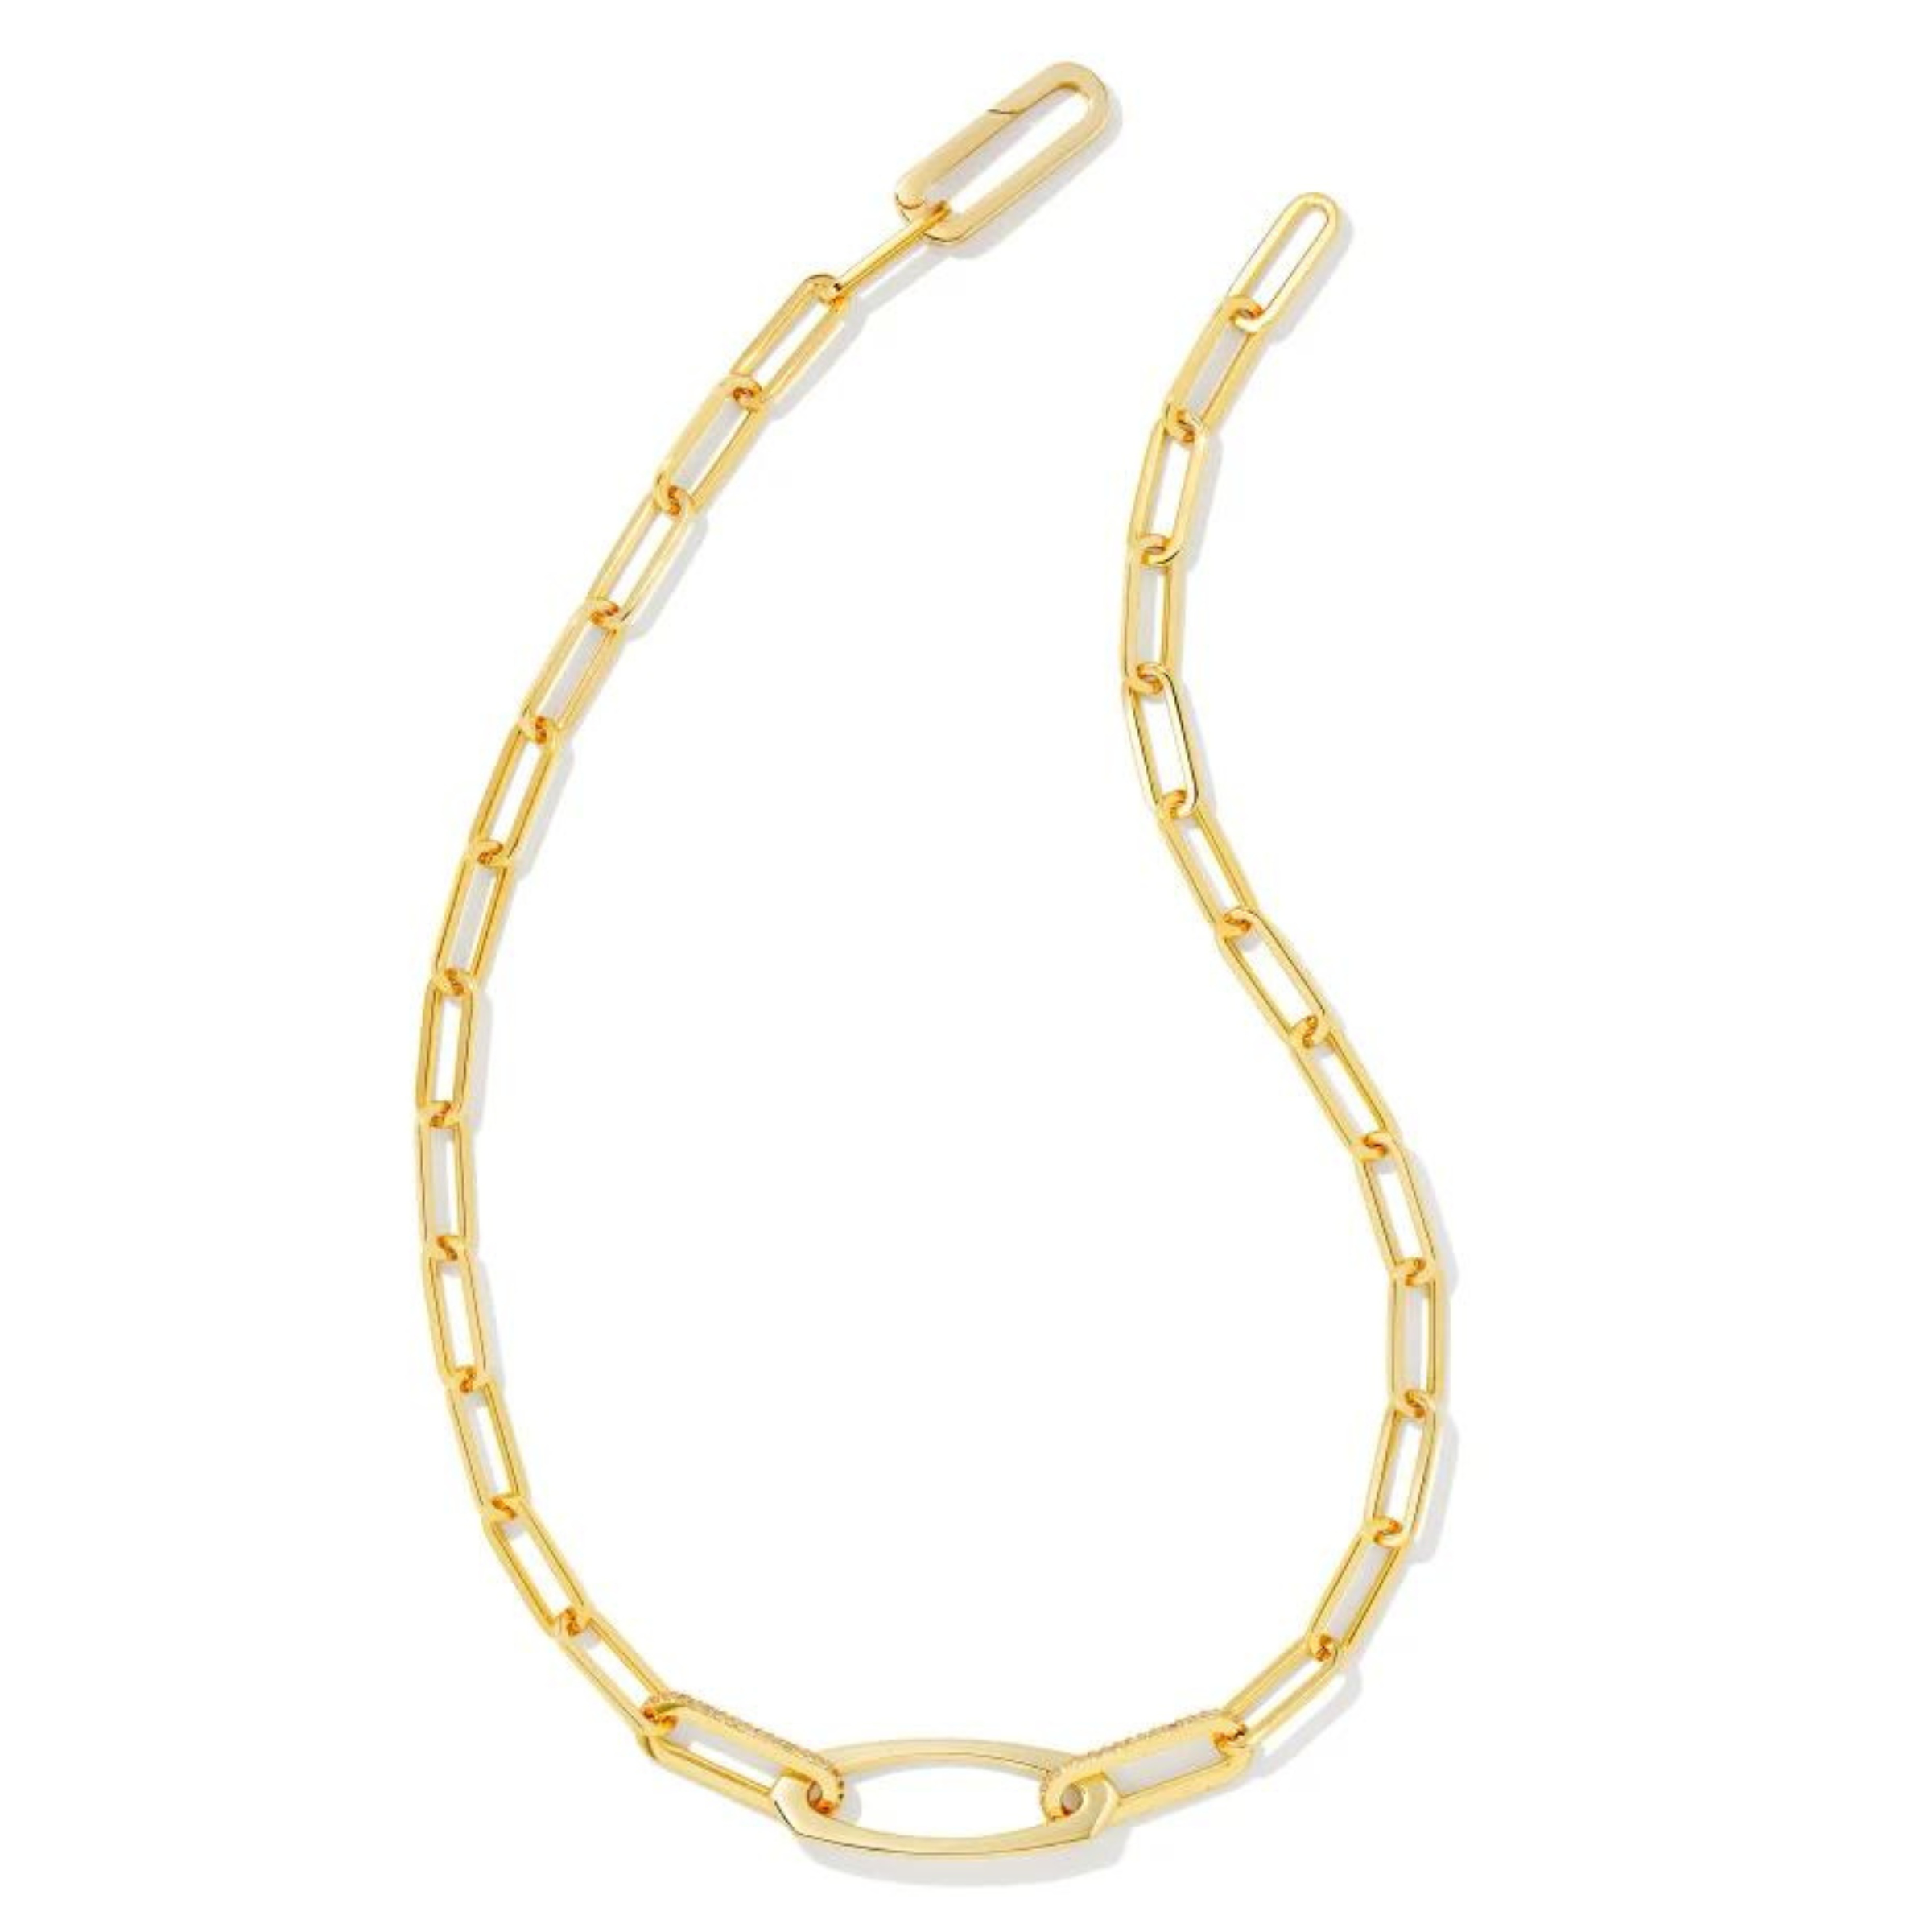 Kendra Scott | Adeline Chain Necklace in Gold